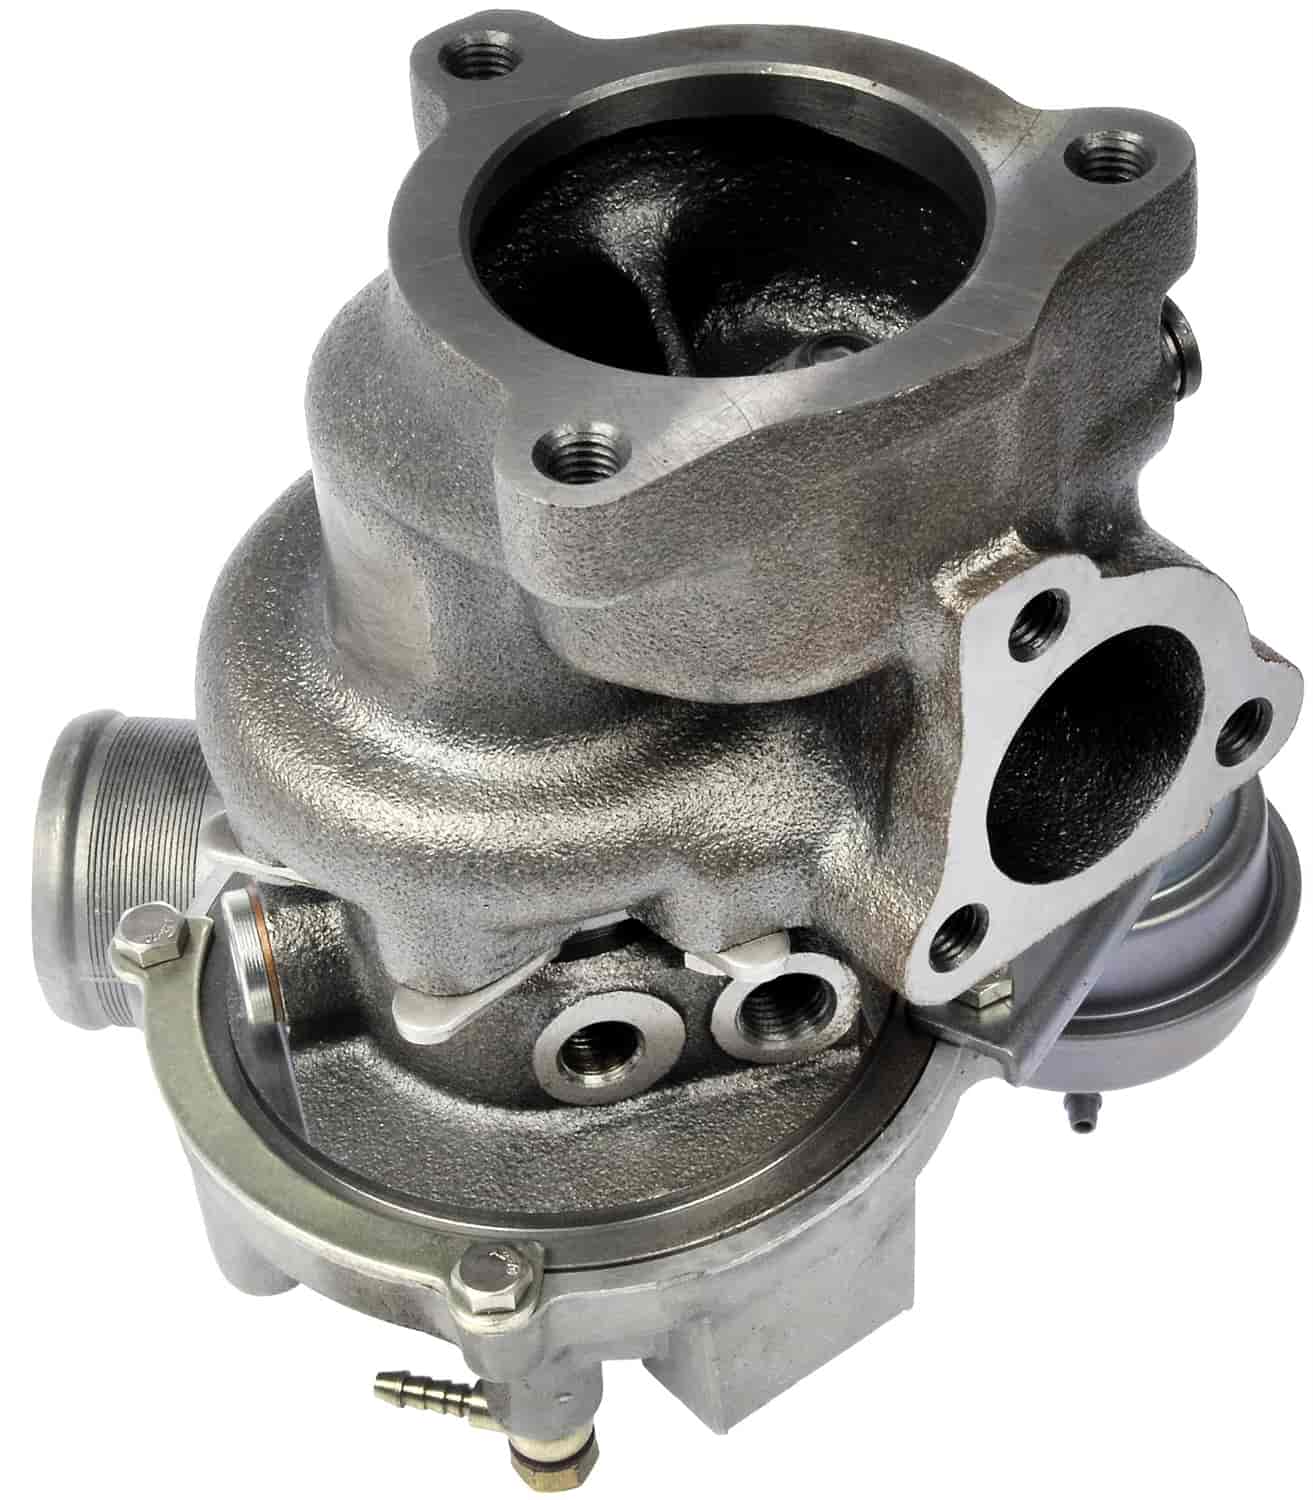 Turbo includes gasket/hardware